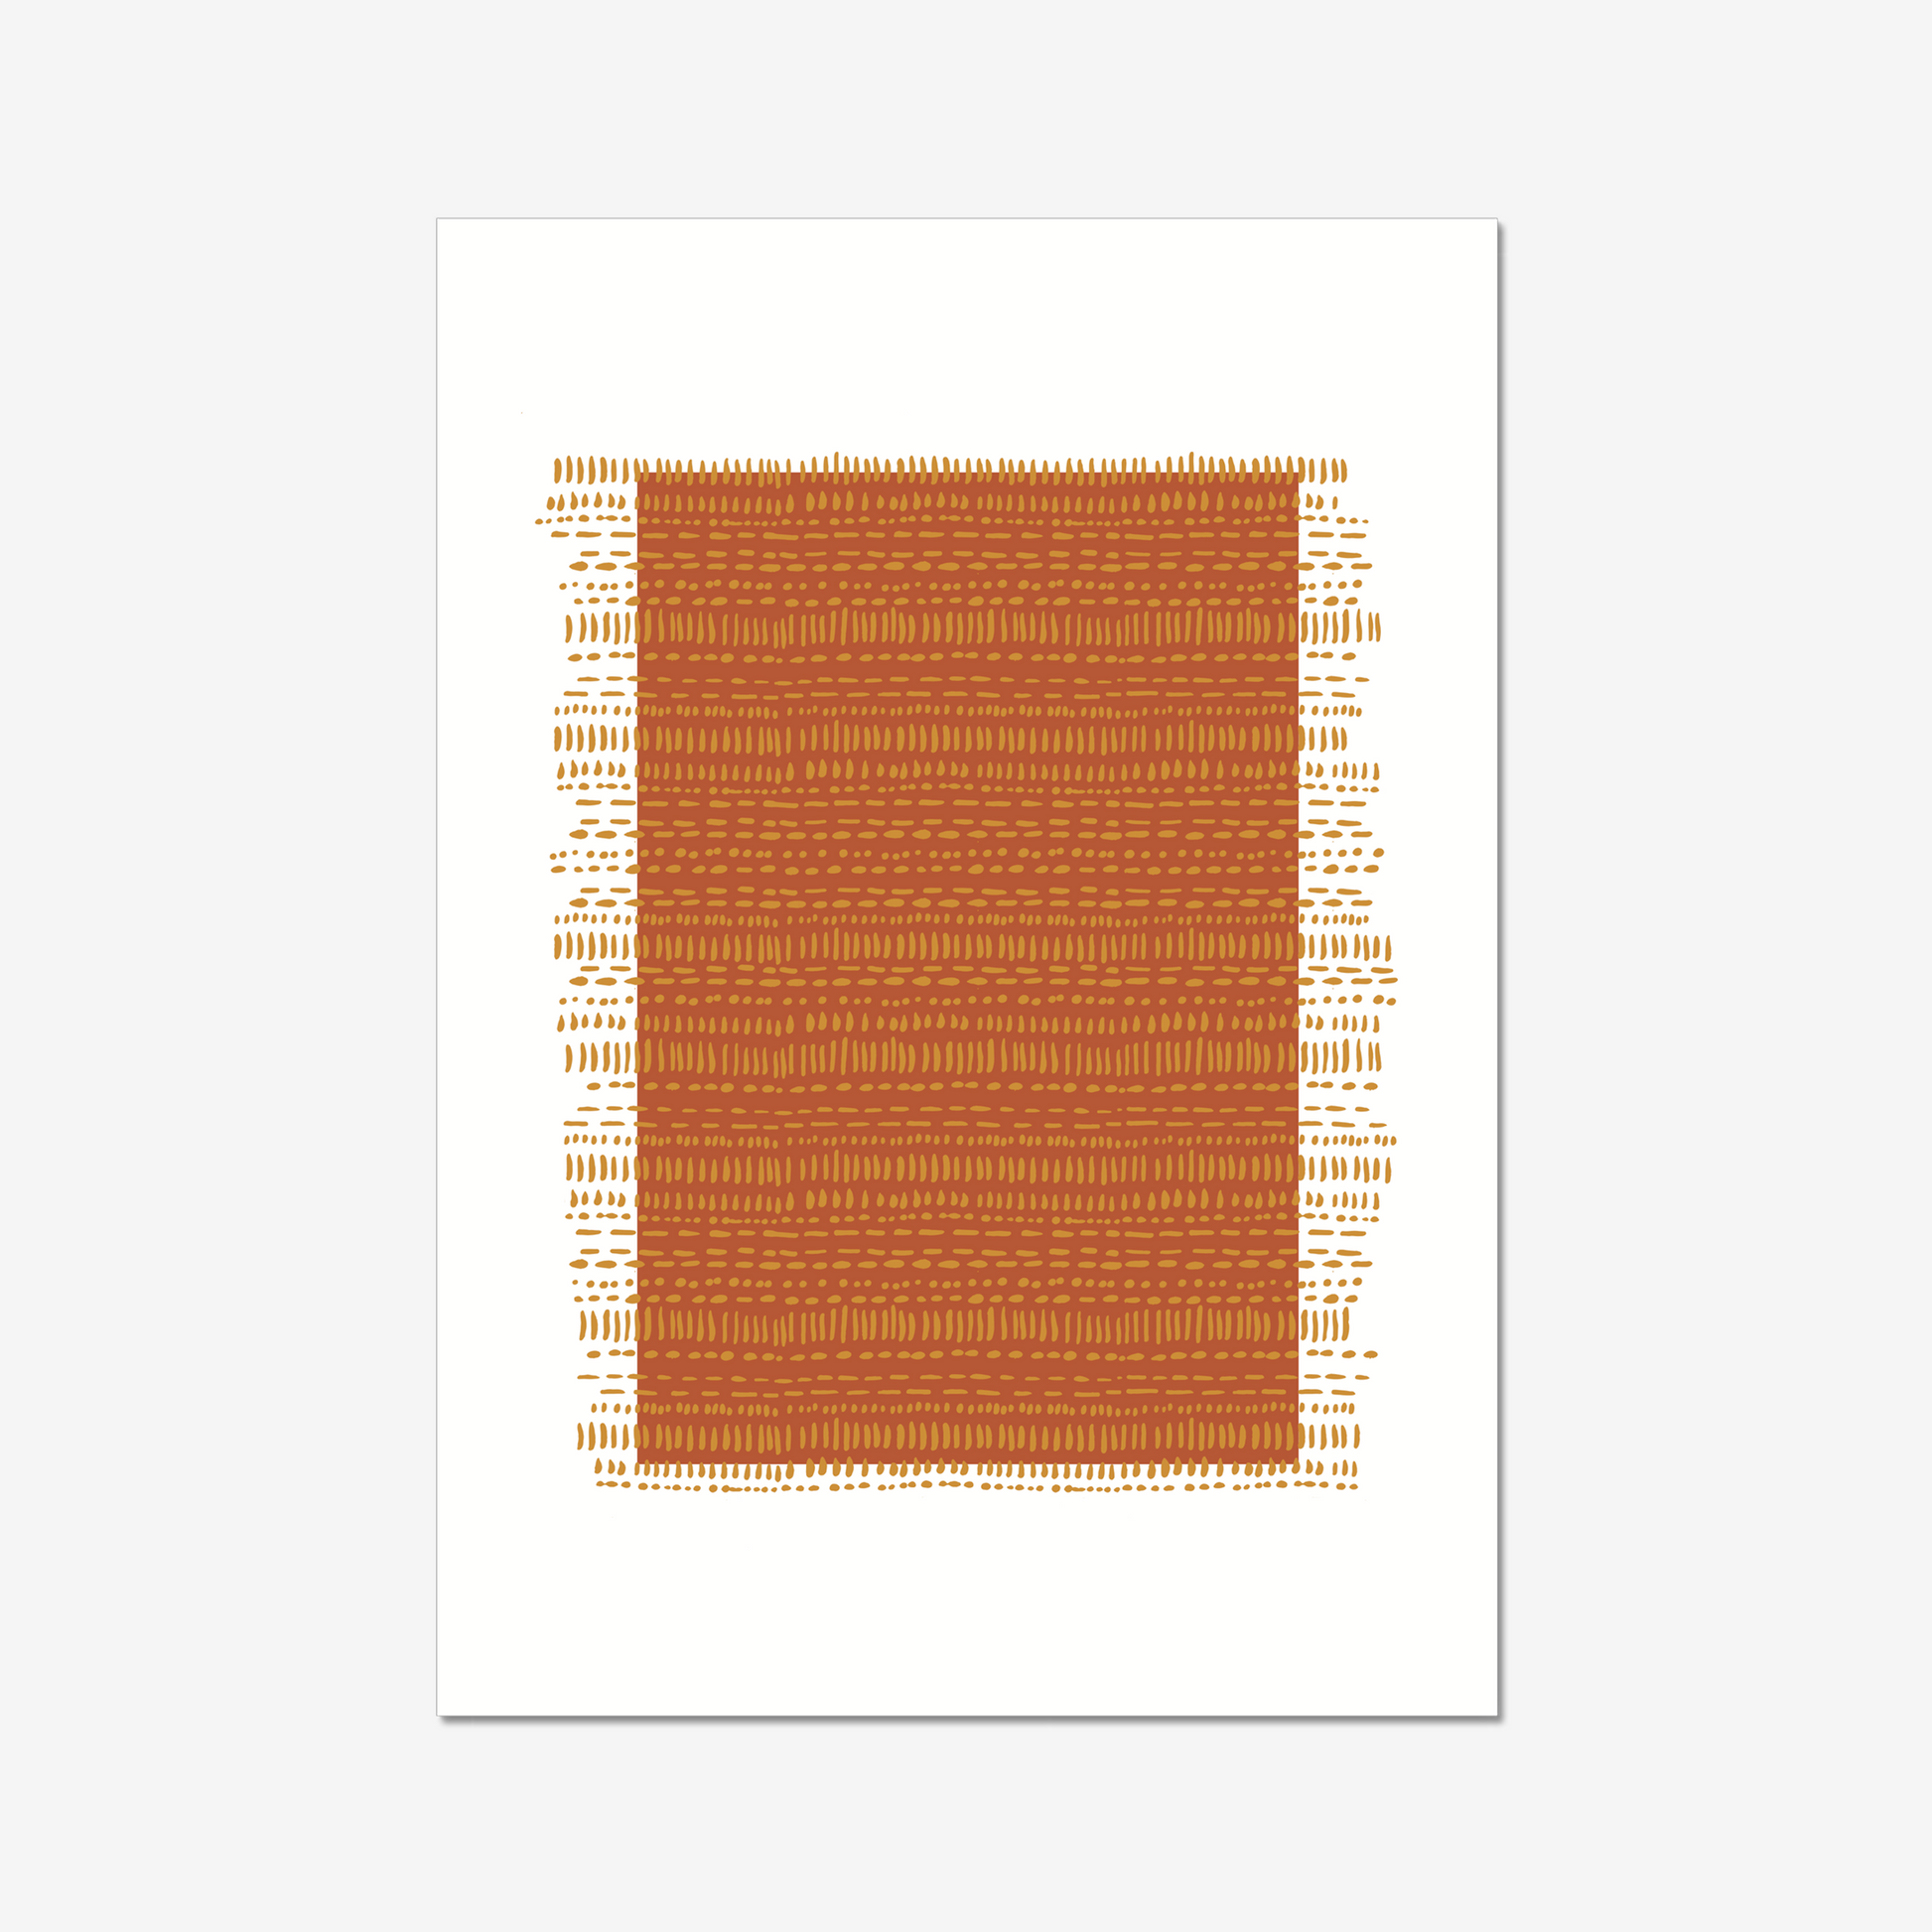 This beautiful art print is perfect for adding a touch of autumnal style to your home. The warm, earthy colors and minimalist bohemian pattern are sure to add a touch of charm and personality to any room.